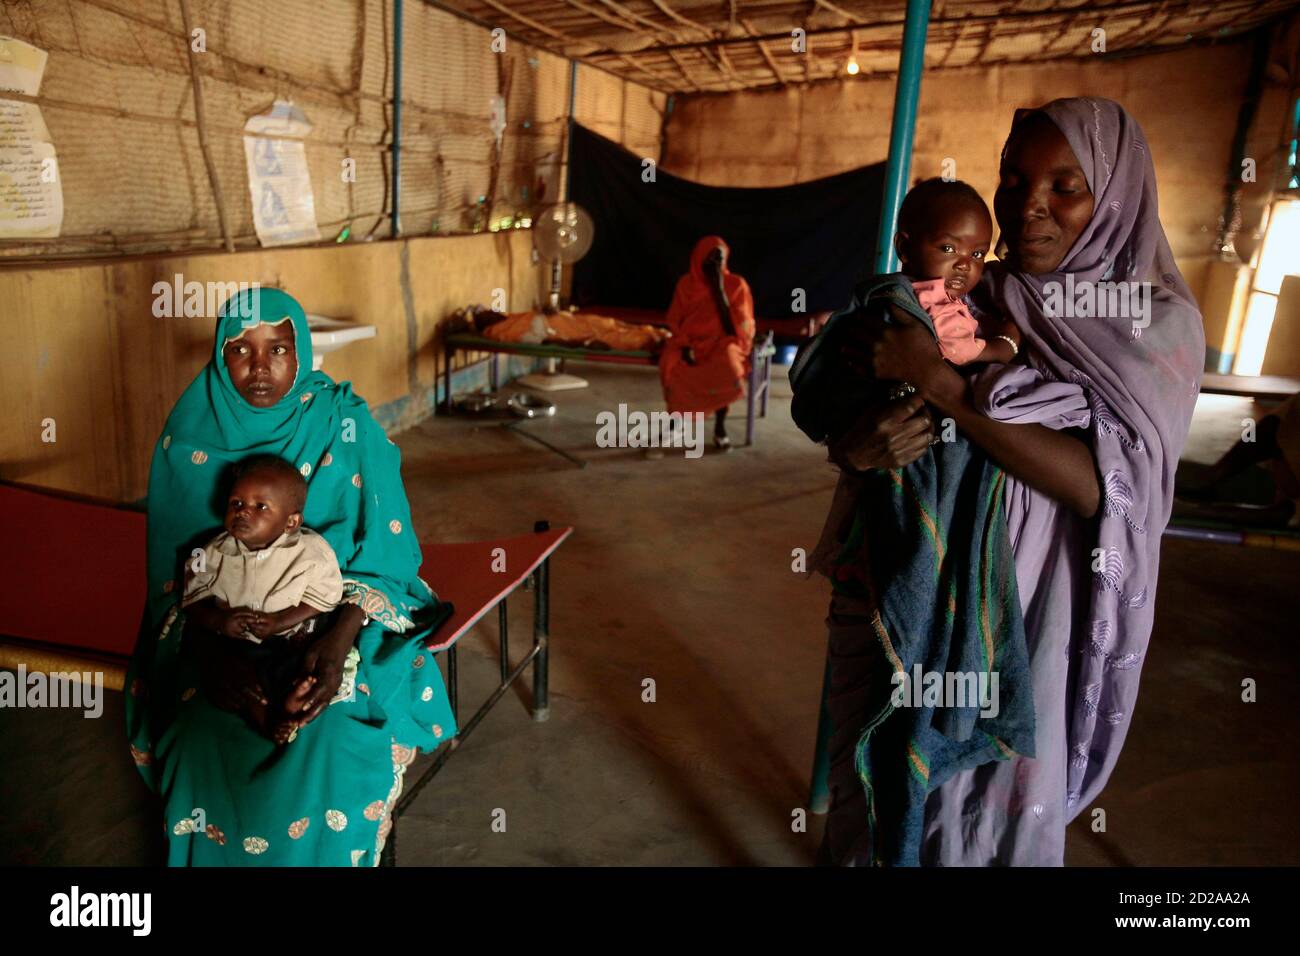 Displaced Sudanese women hold their children at the paediatrics department of an International committee of the Red Cross clinic in Abu Shouk IDP camp in El Fasher, northern Darfur, March 16, 2009.  REUTERS/Zohra Bensemra (SUDAN CONFLICT POLITICS) Stock Photo